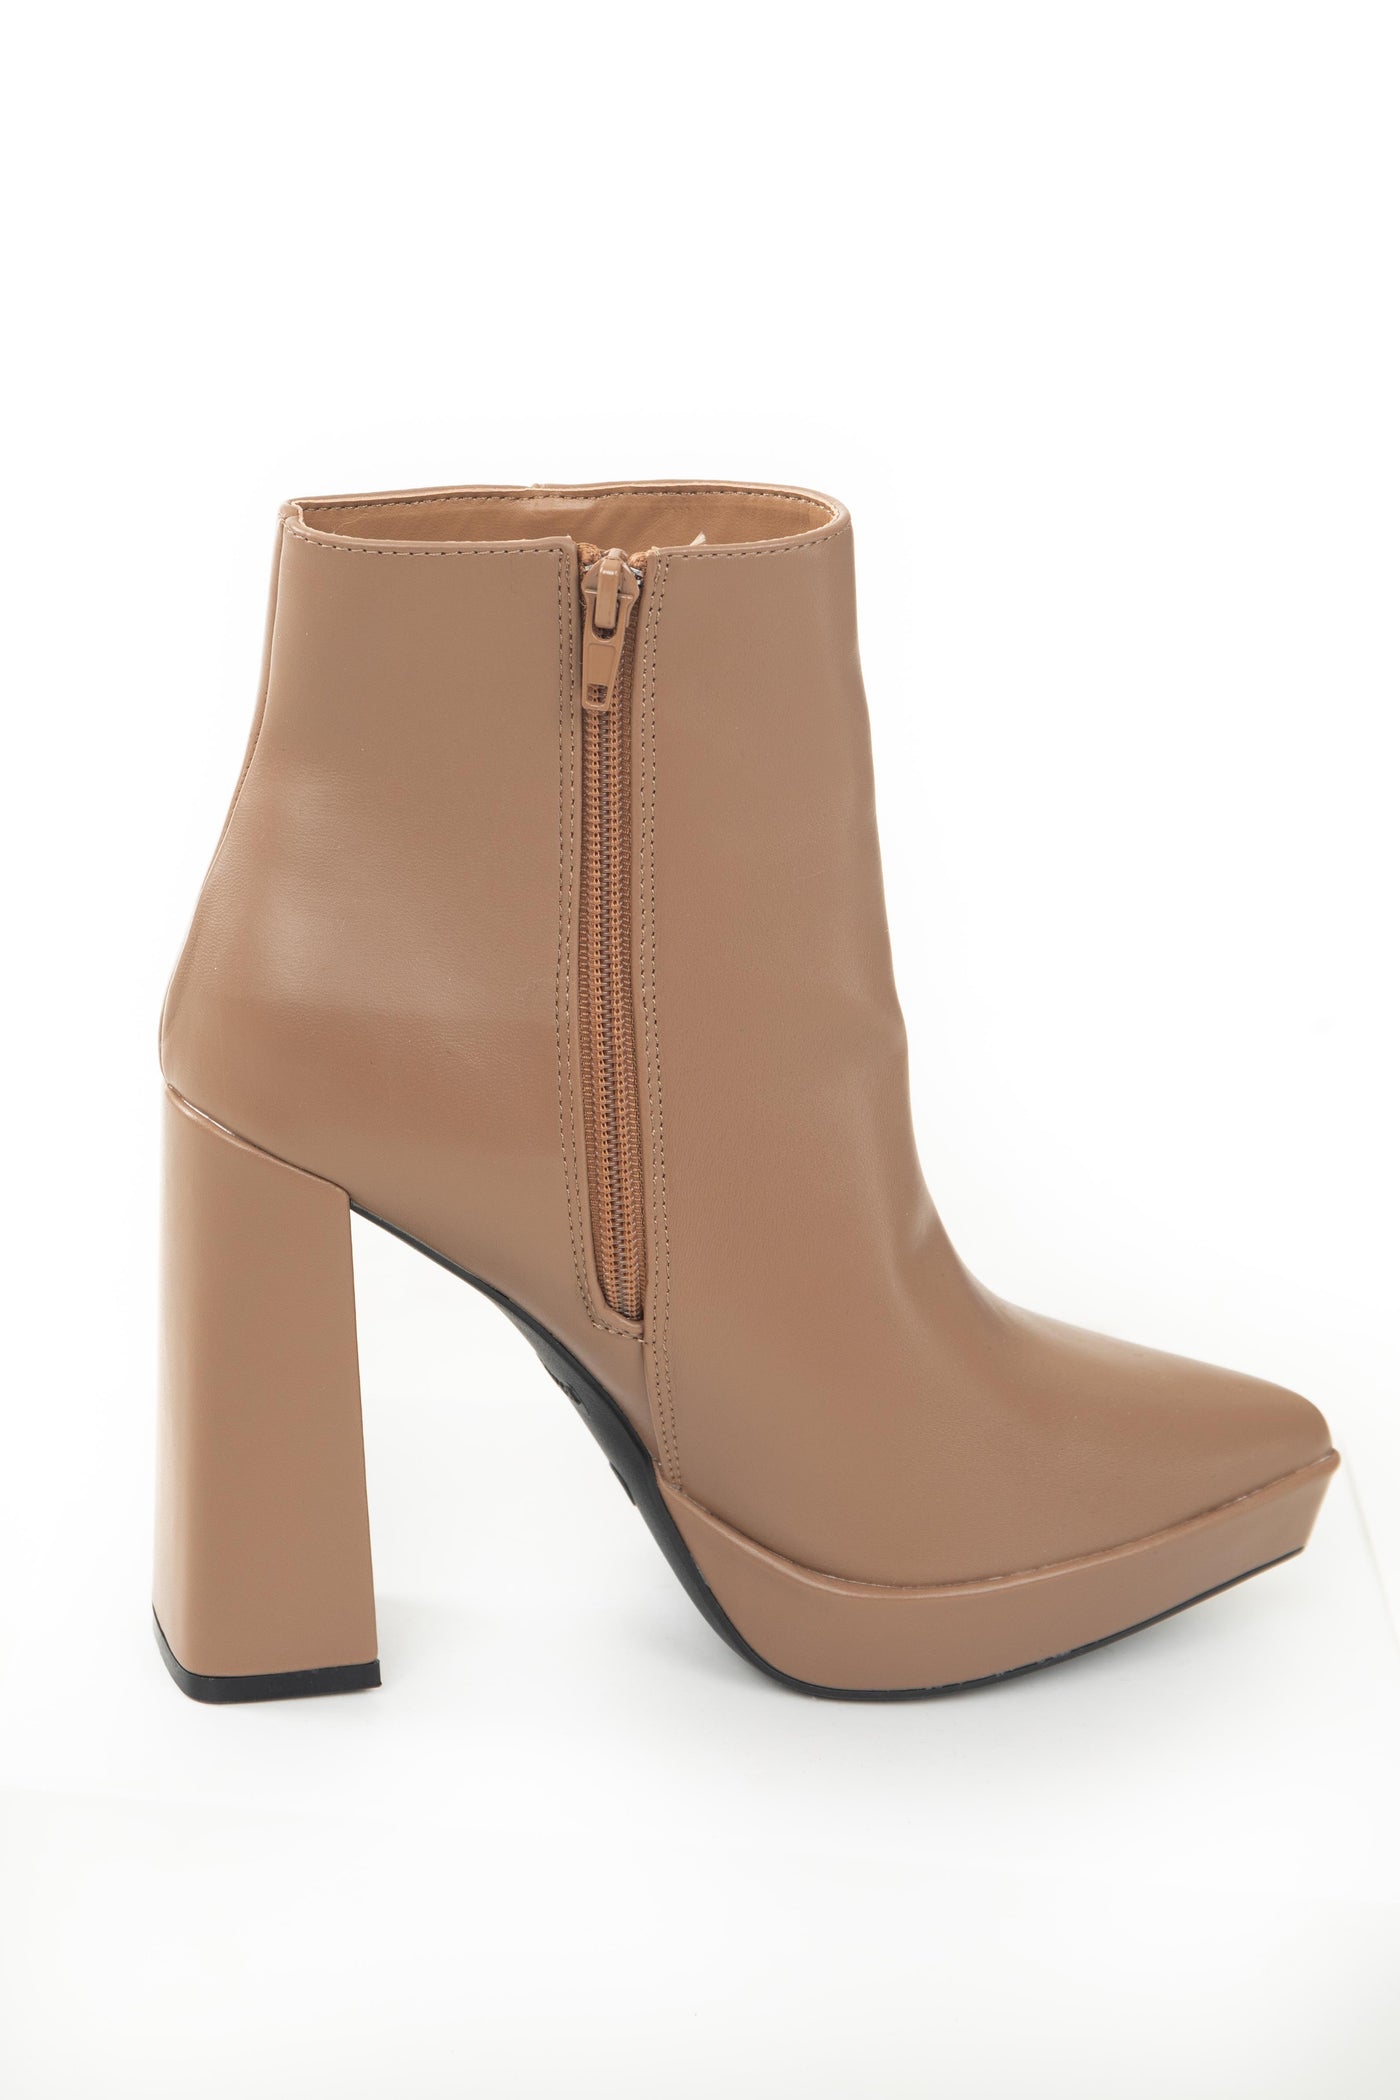 Sepia Faux Leather Flared Heel Pointed Toe Bootie